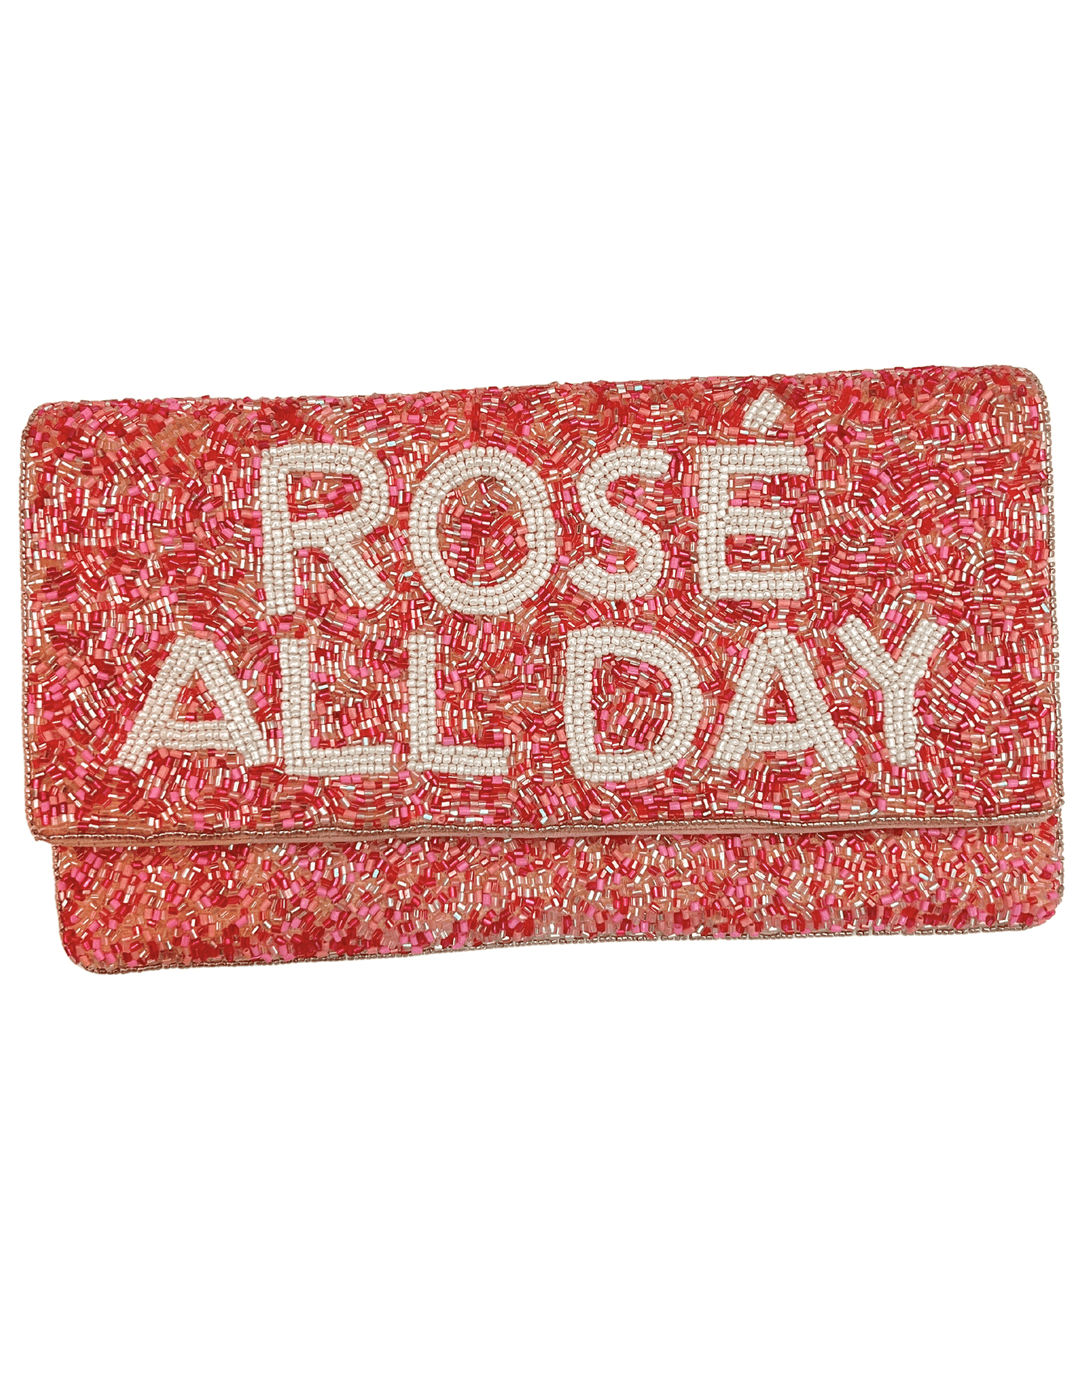 rose all day novelty handbags beaded clutch with crossbody chain